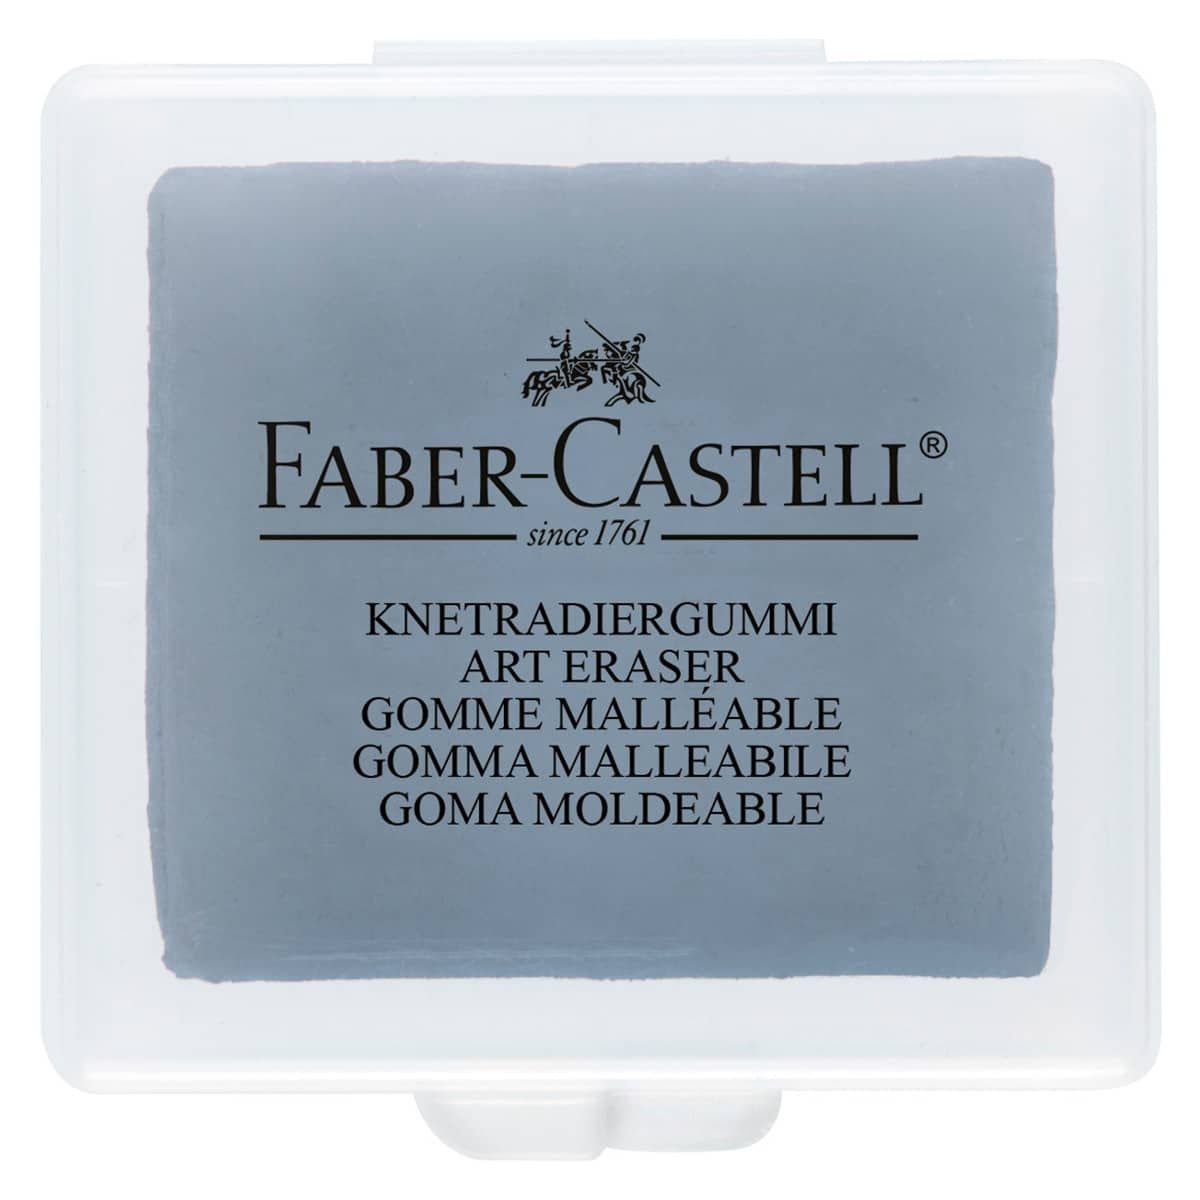 2x Faber Castell Soft Kneadable Erasers Grey Drawing Sketch Art